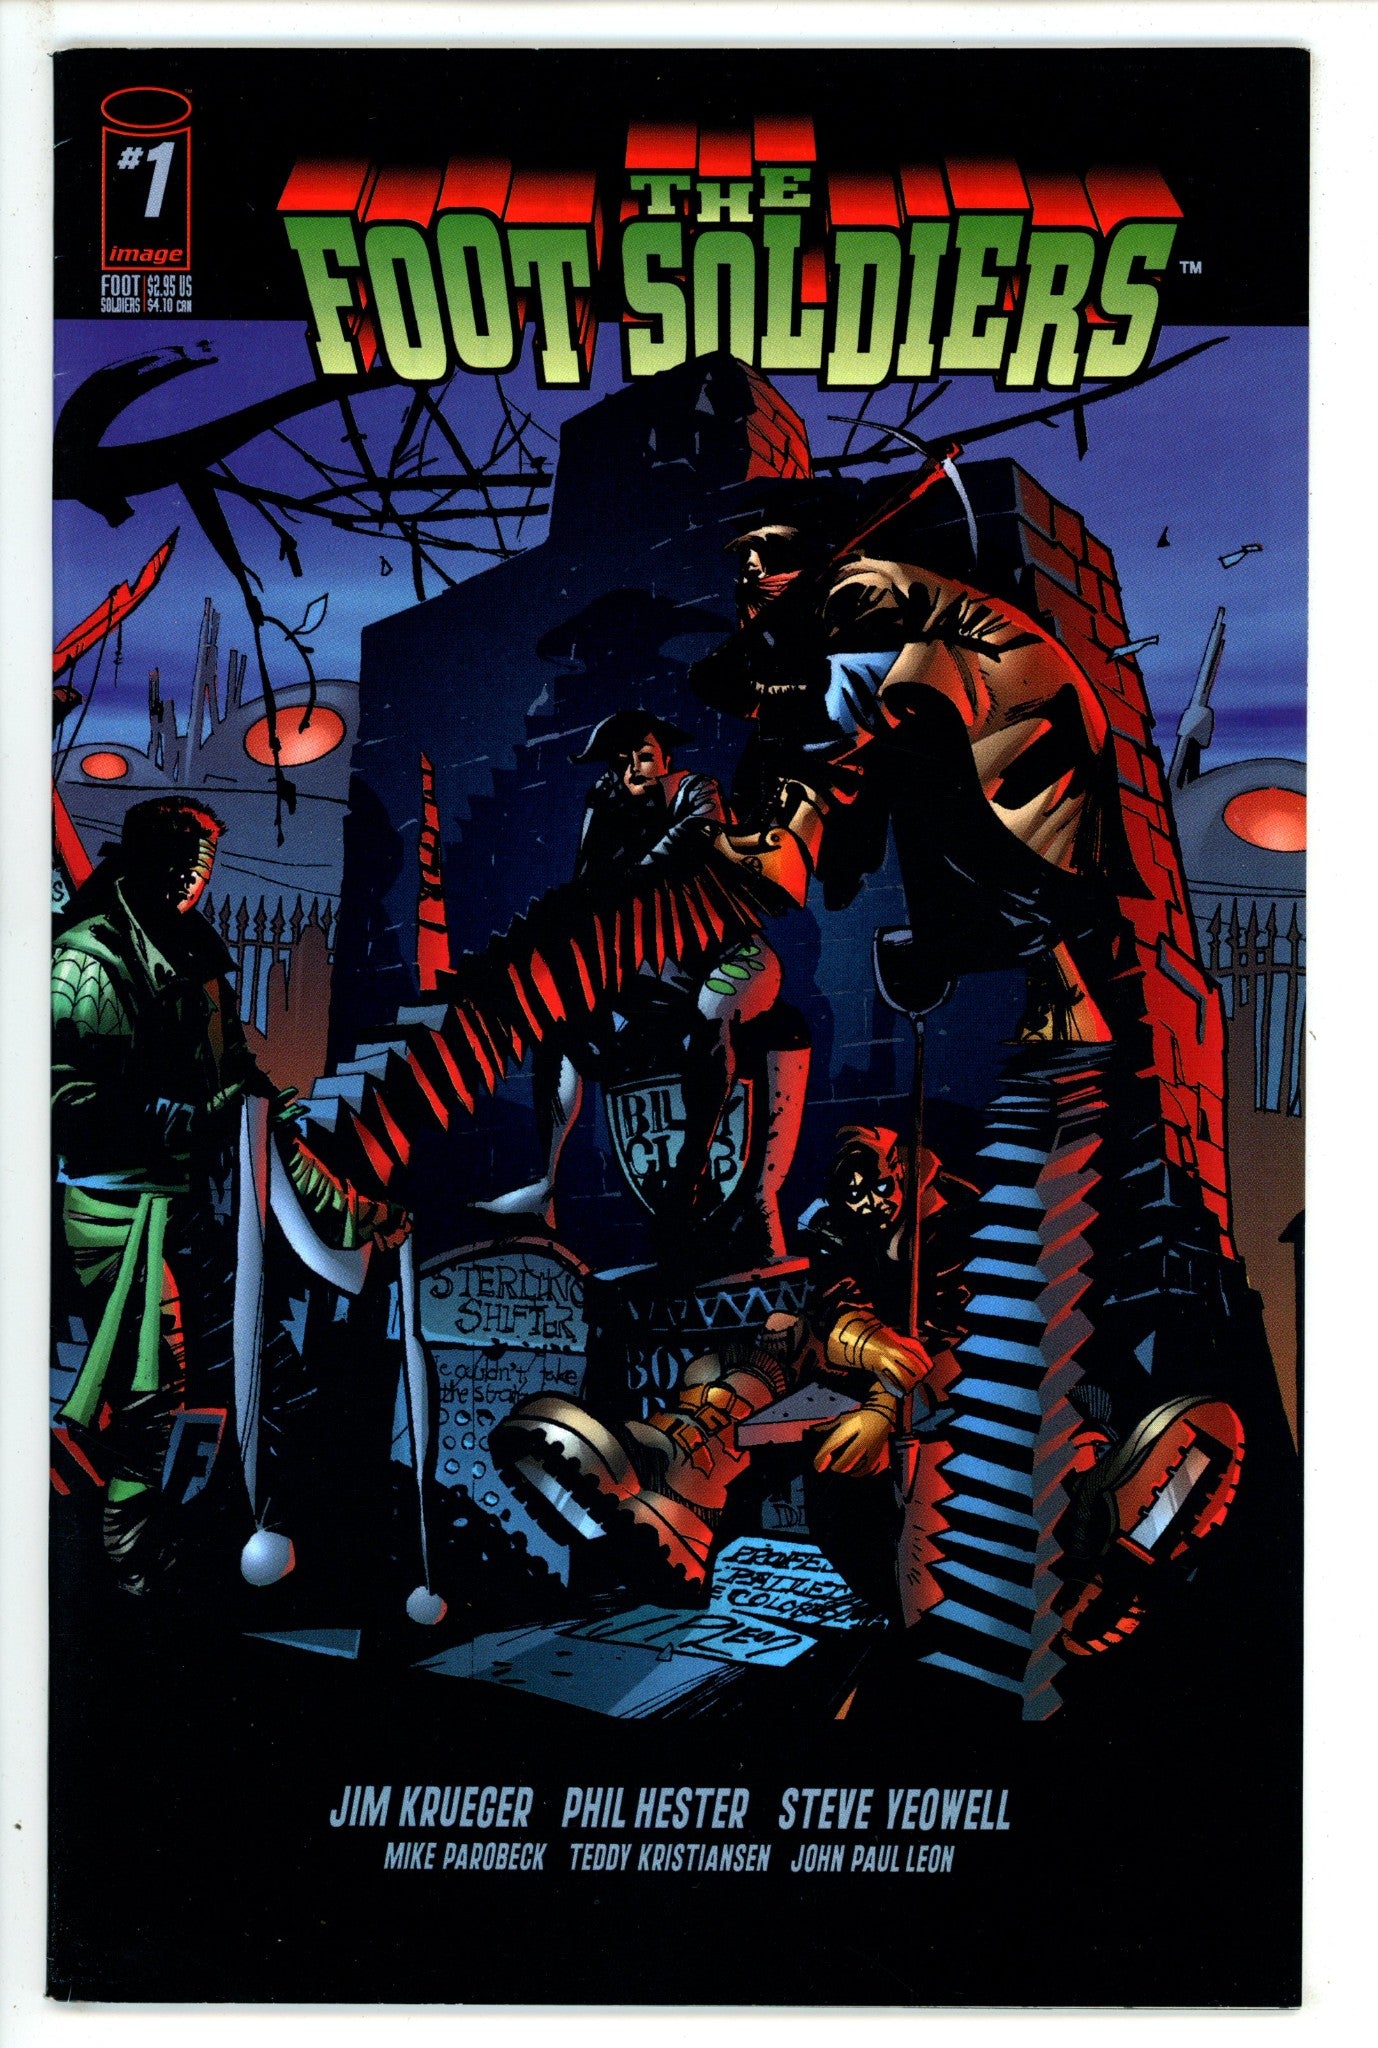 The Foot Soldiers Vol 2 1 (1997)